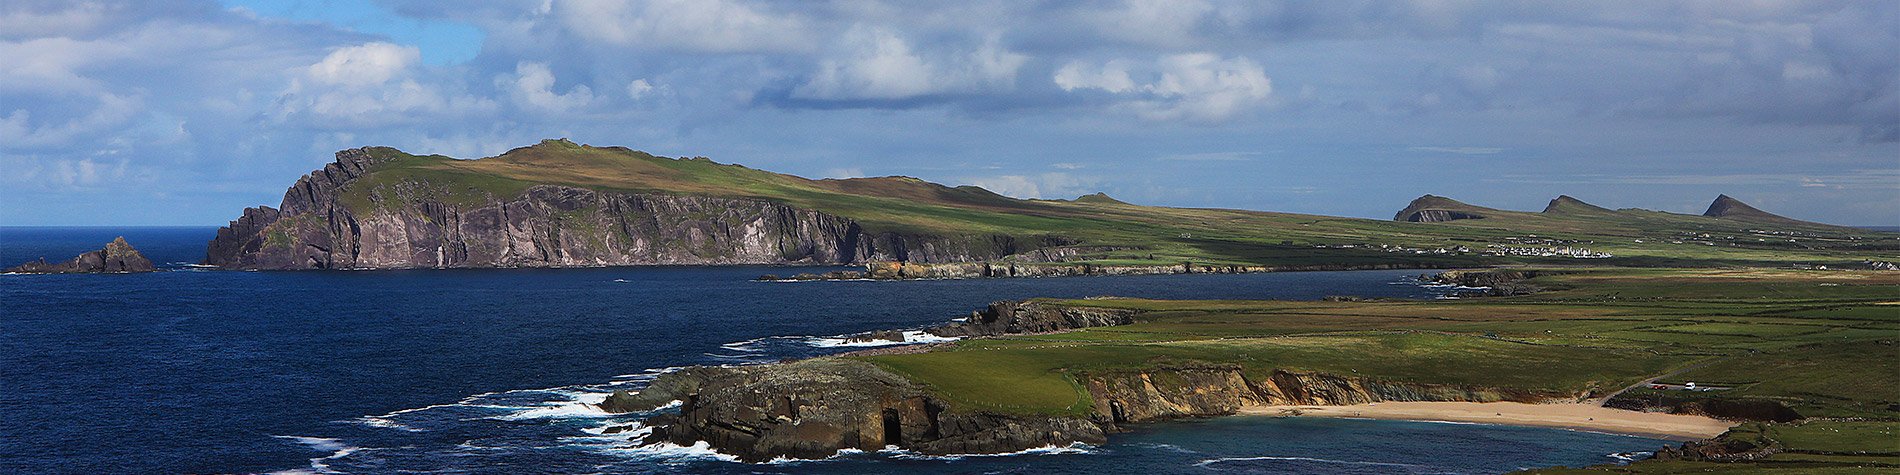 Activities and Tours along the Wild Atlantic Way